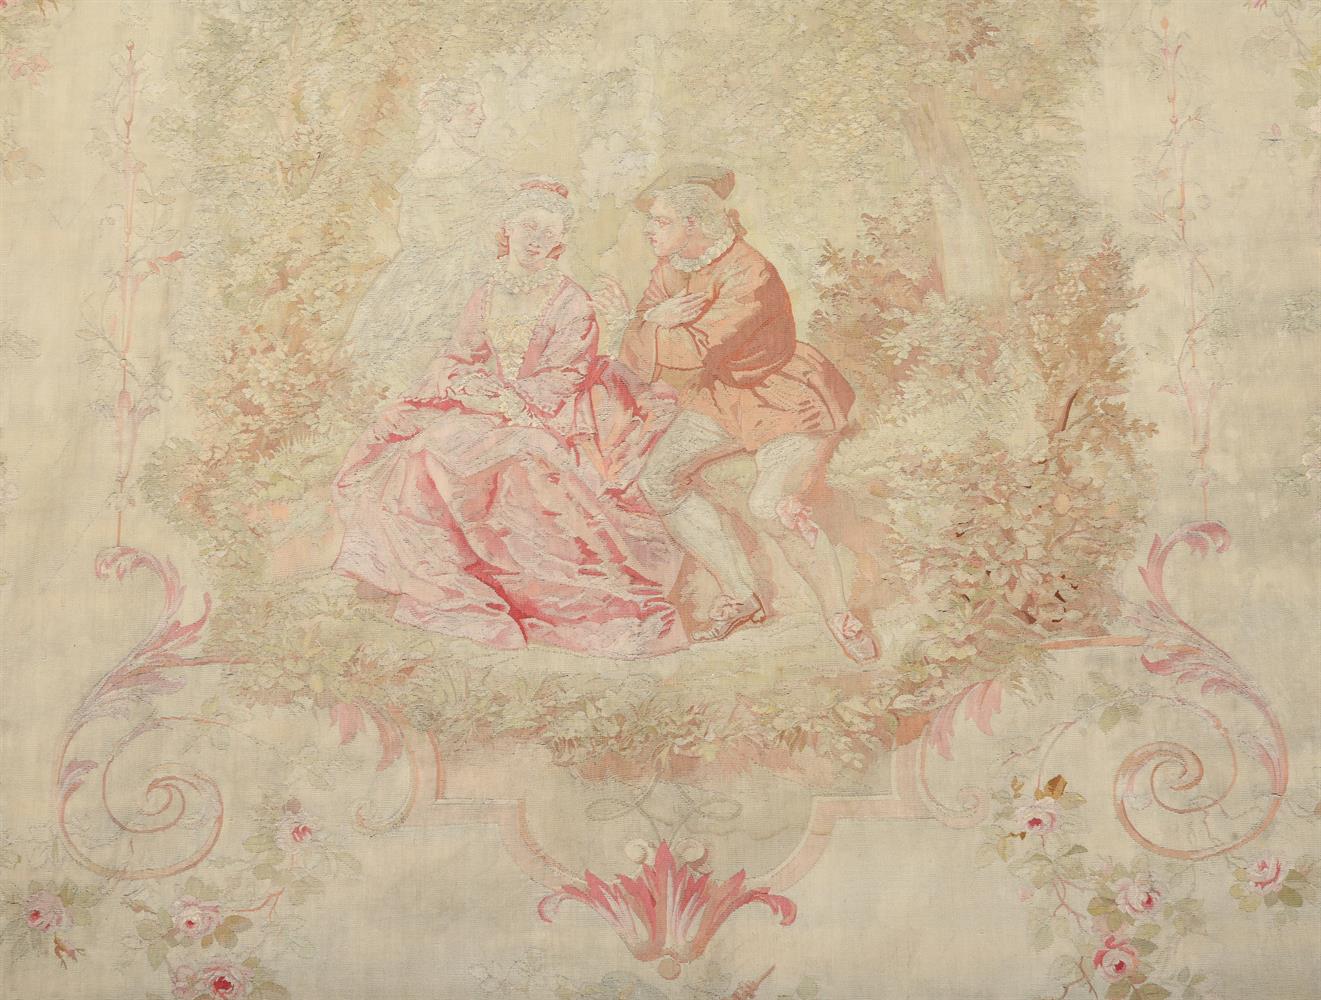 A BELGIAN WOVEN TAPESTRY IN AUBUSSON STYLE, LATE 19TH/EARLY 20TH CENTURY - Image 2 of 2